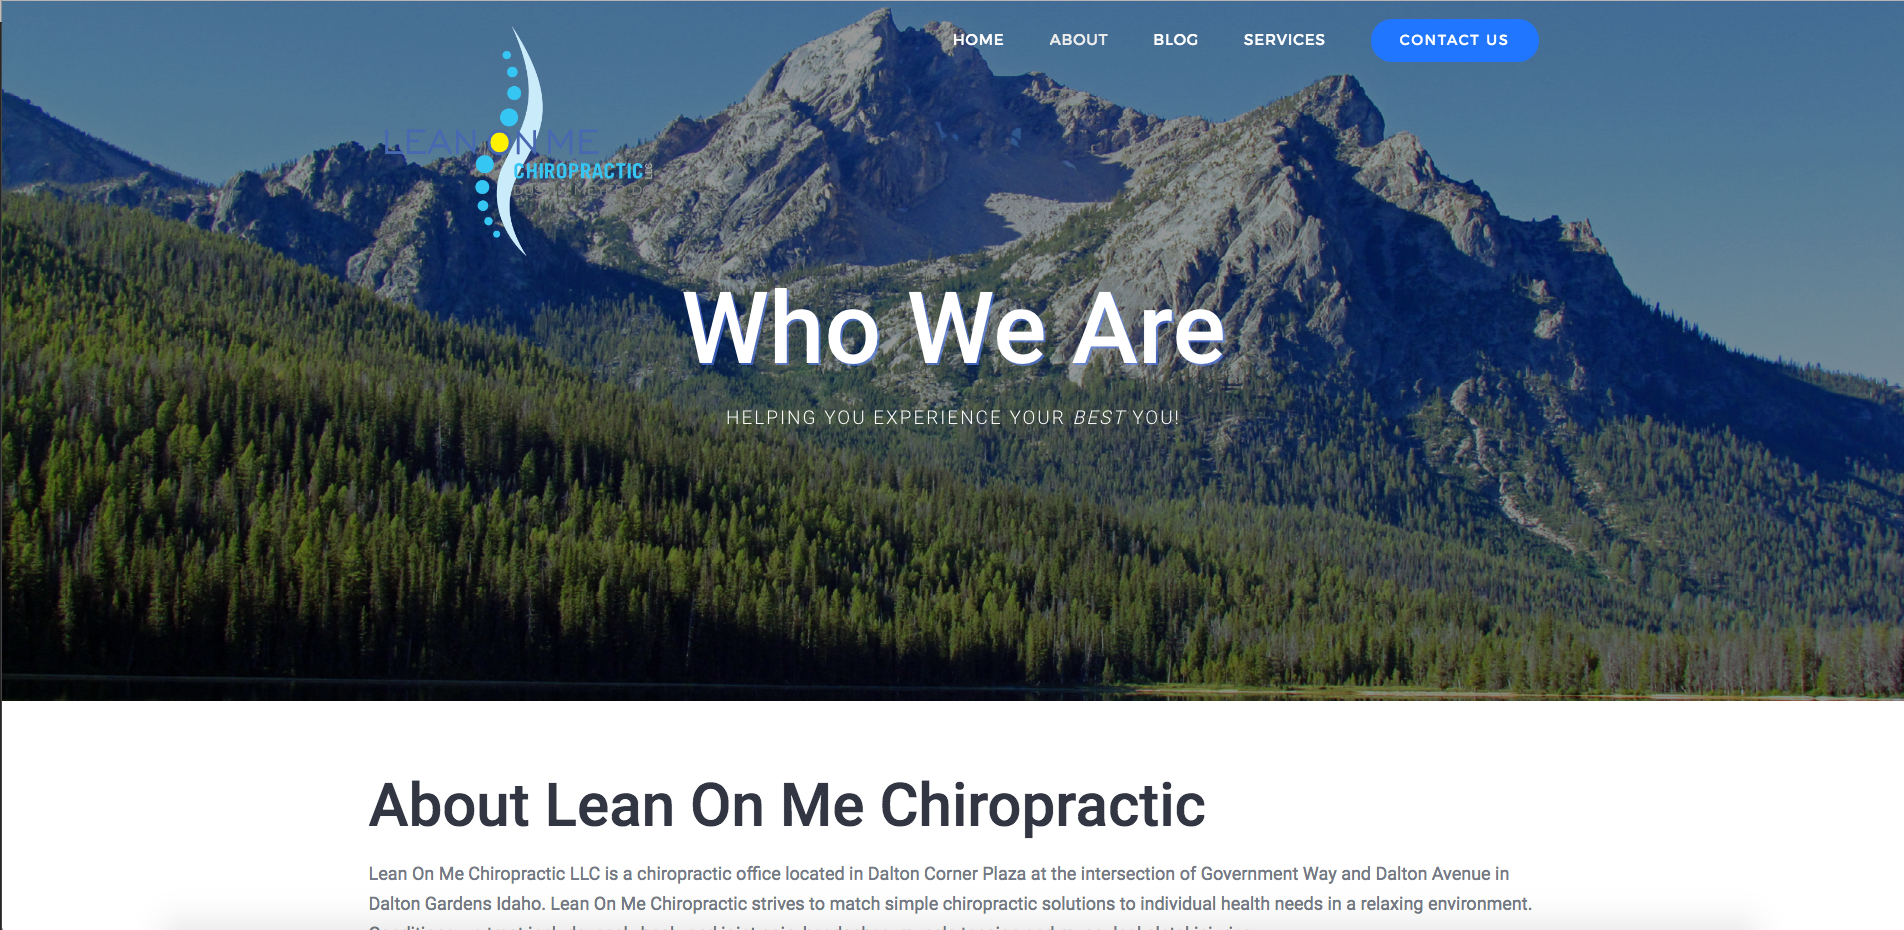 Lean On Me Chiropractic